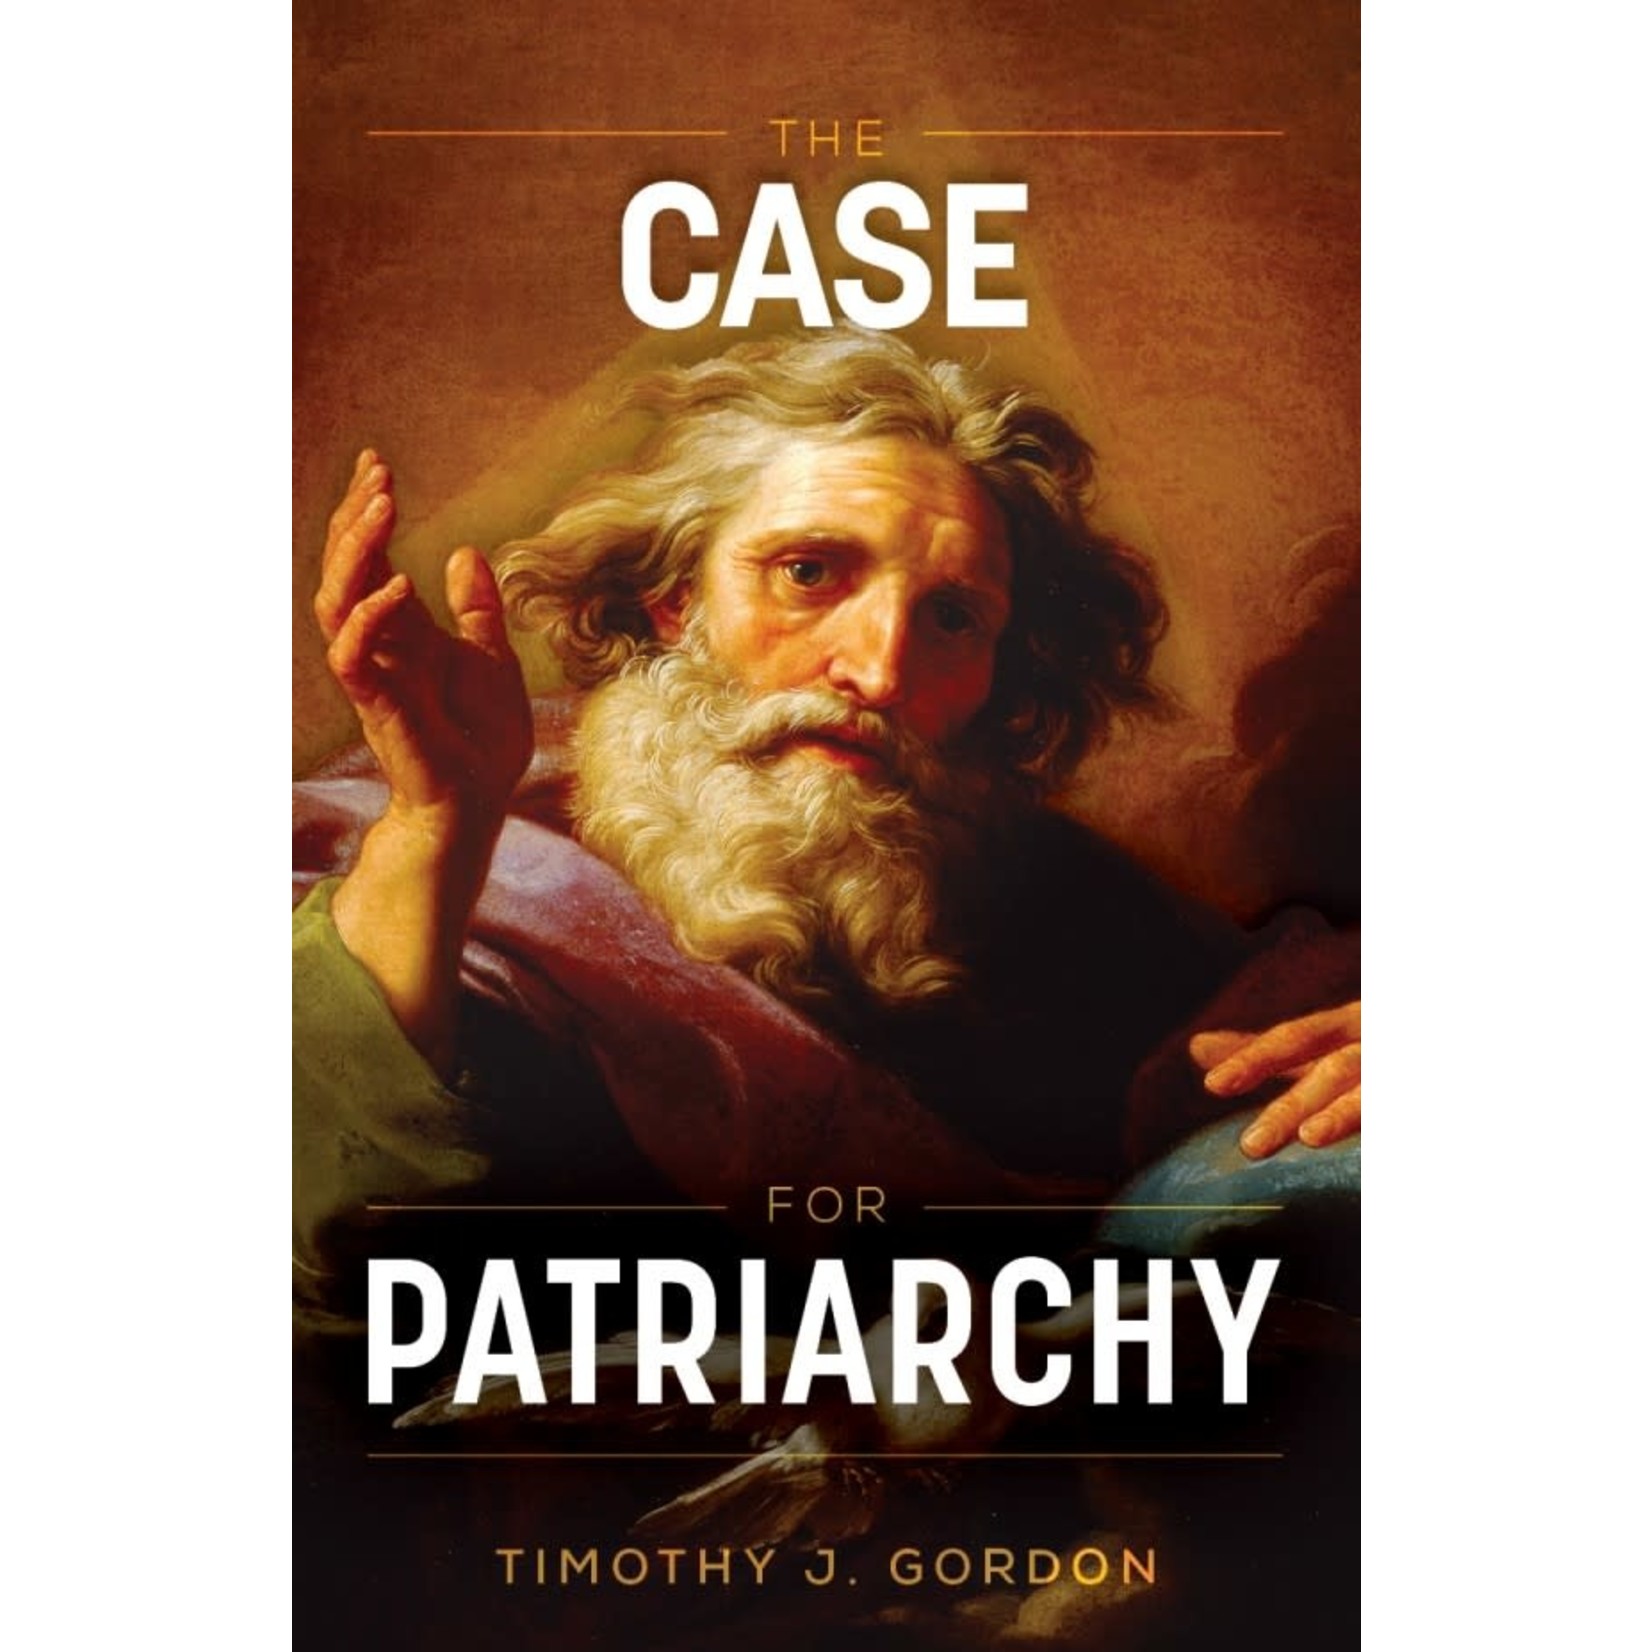 The Case for Patriarchy